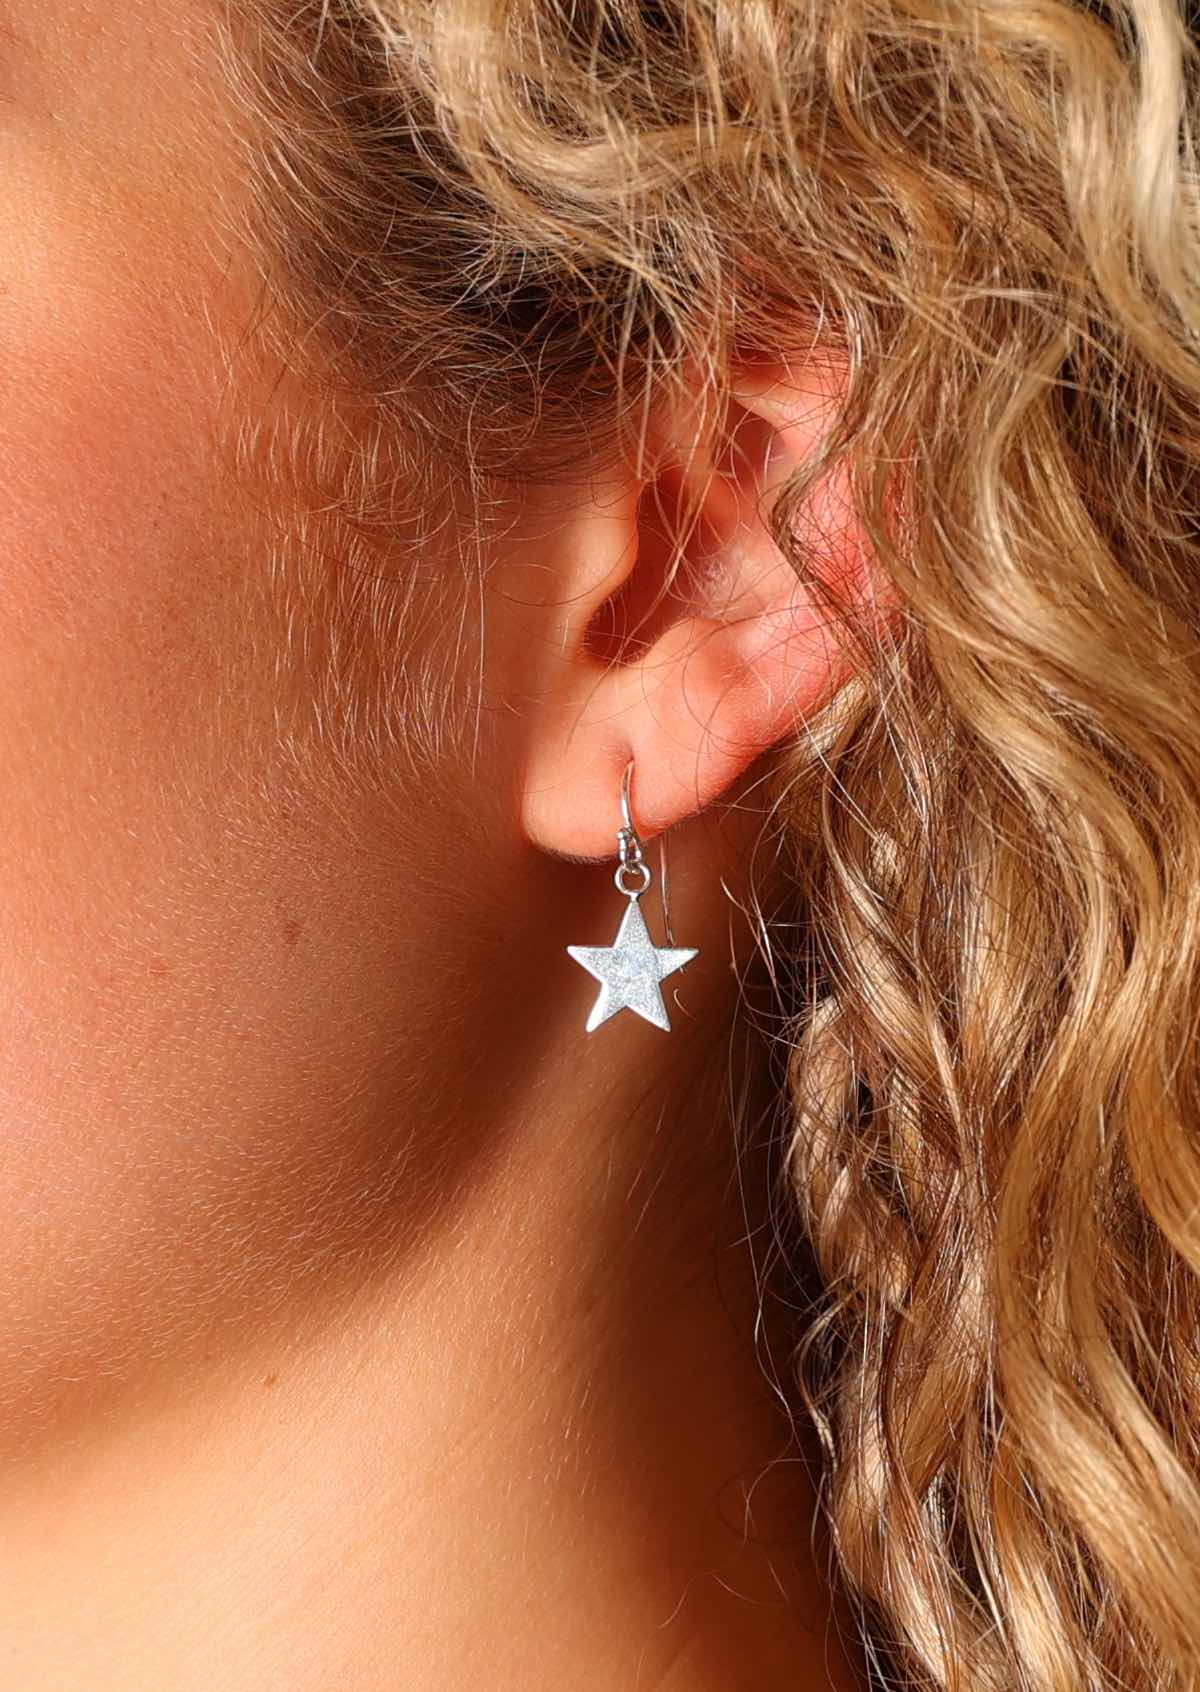 Simple star earrings suspended from wire hook crafted from sterling silver